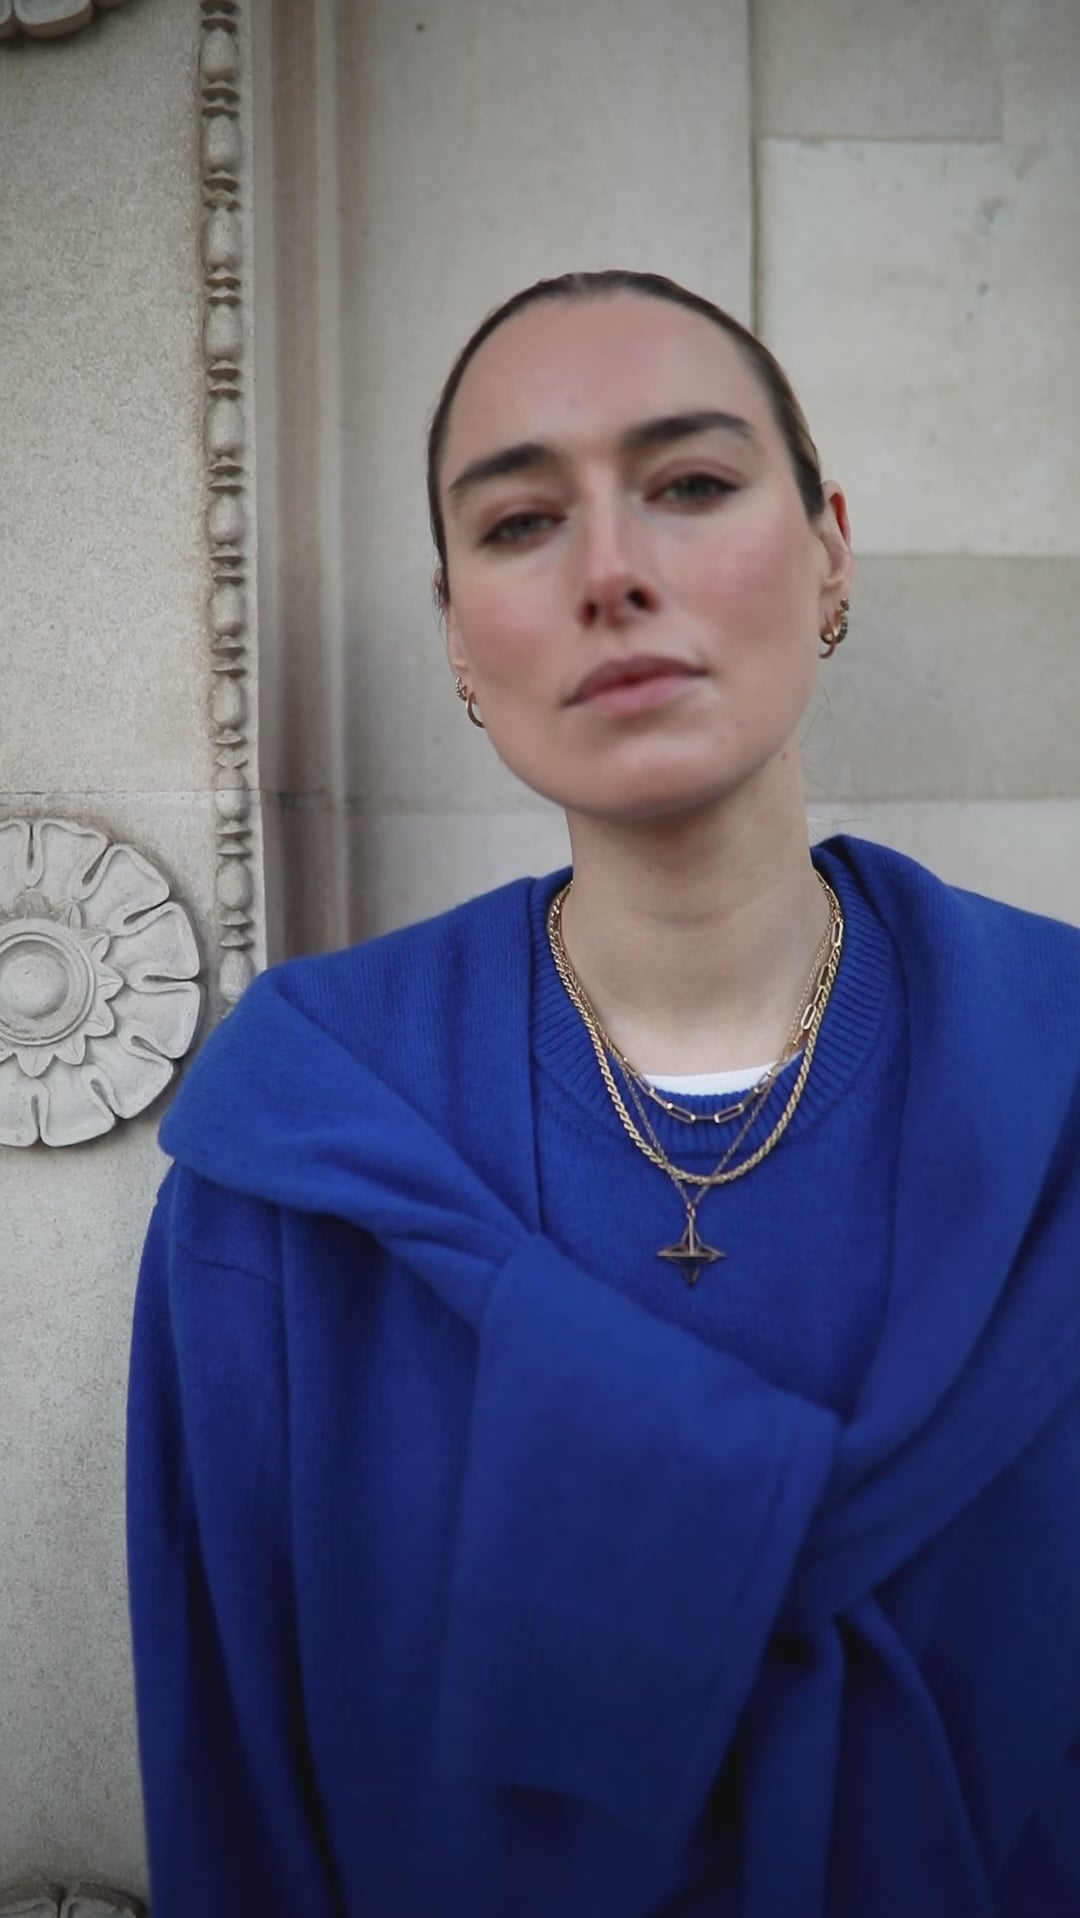 Video of Flora Macdonald Johnston wearing a royal blue jumper and our Gold Vermeil Theodora Pendant amongst other Antonia Guise Jewellery